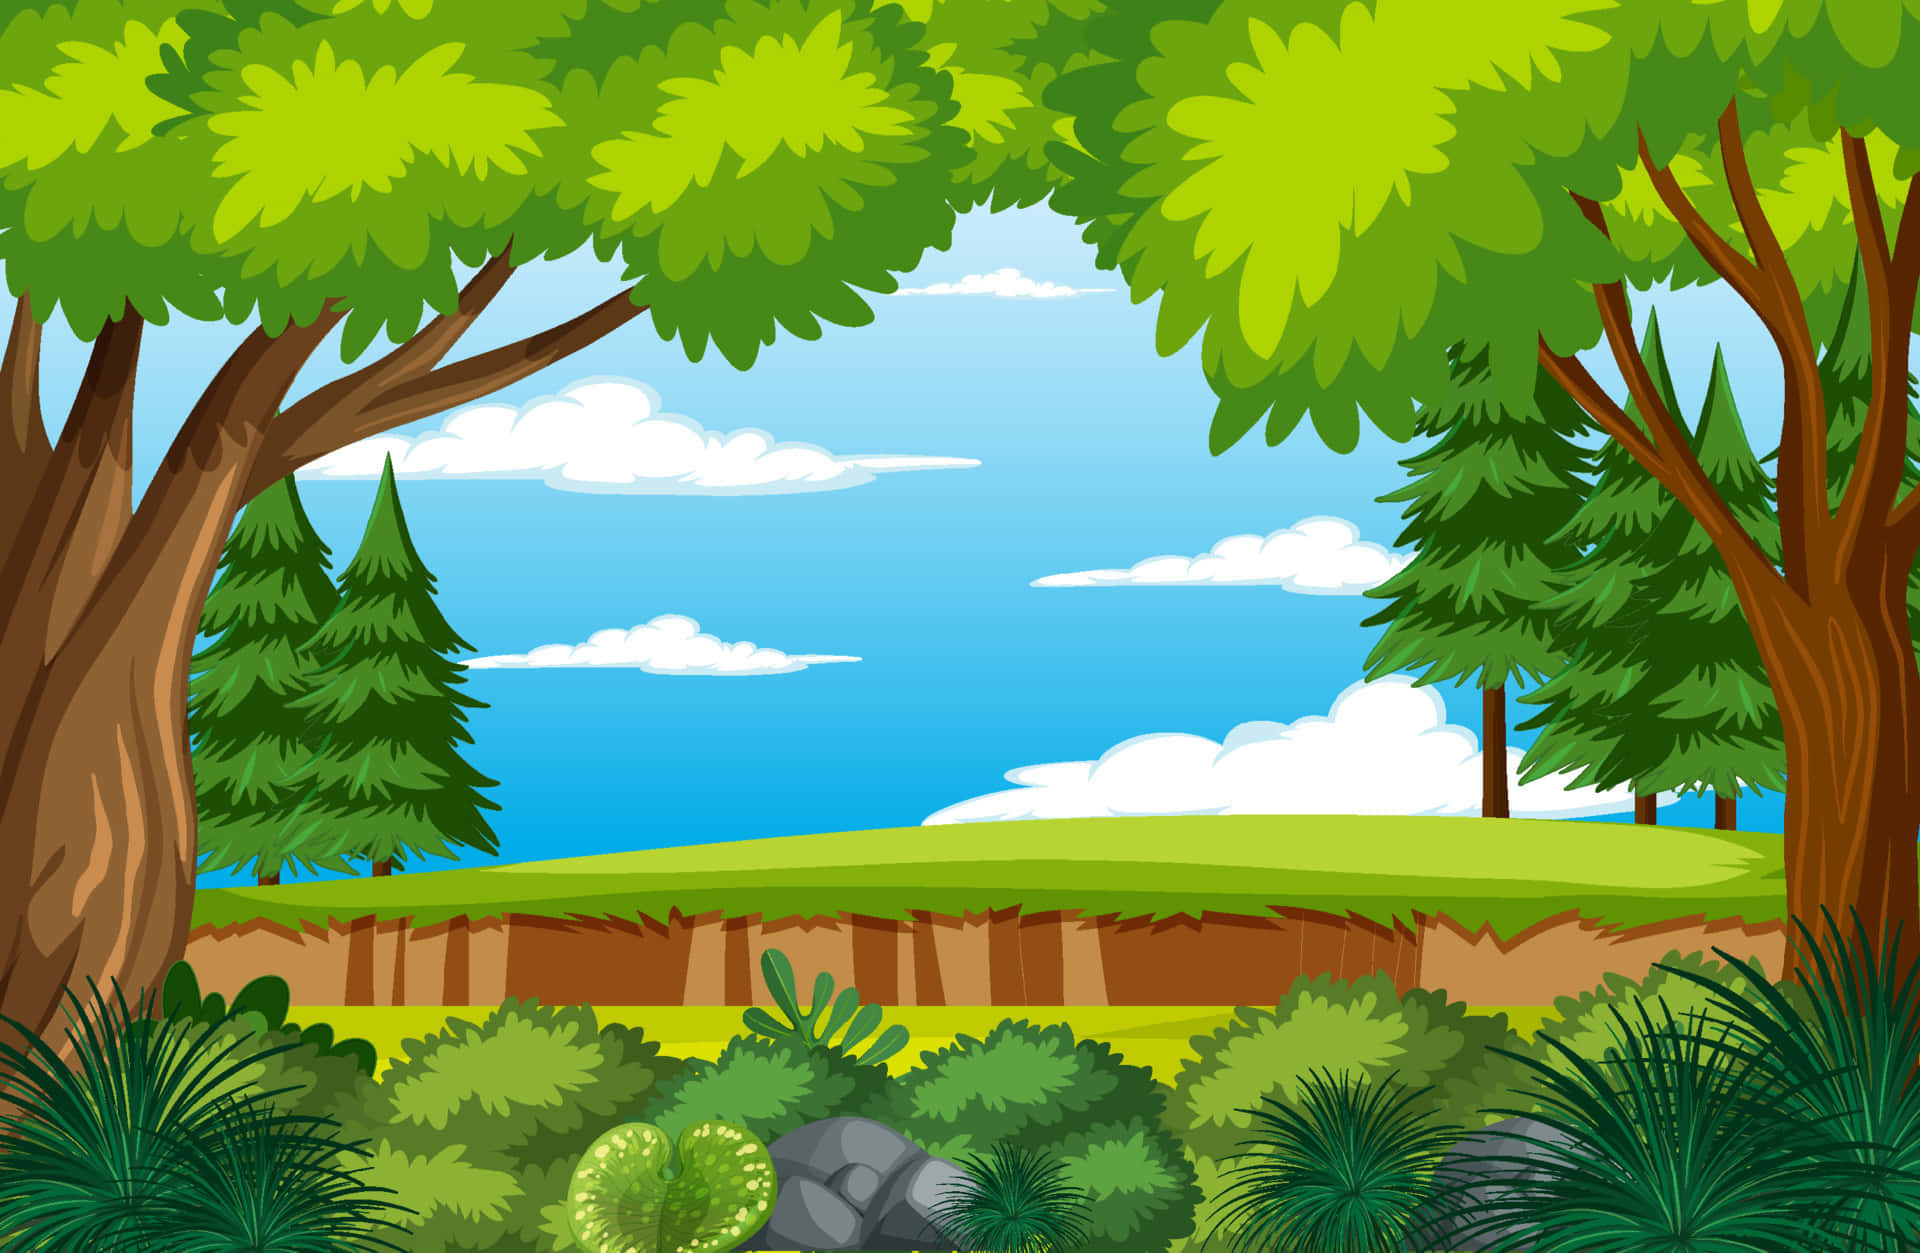 A Cartoon Landscape With Trees And Grass